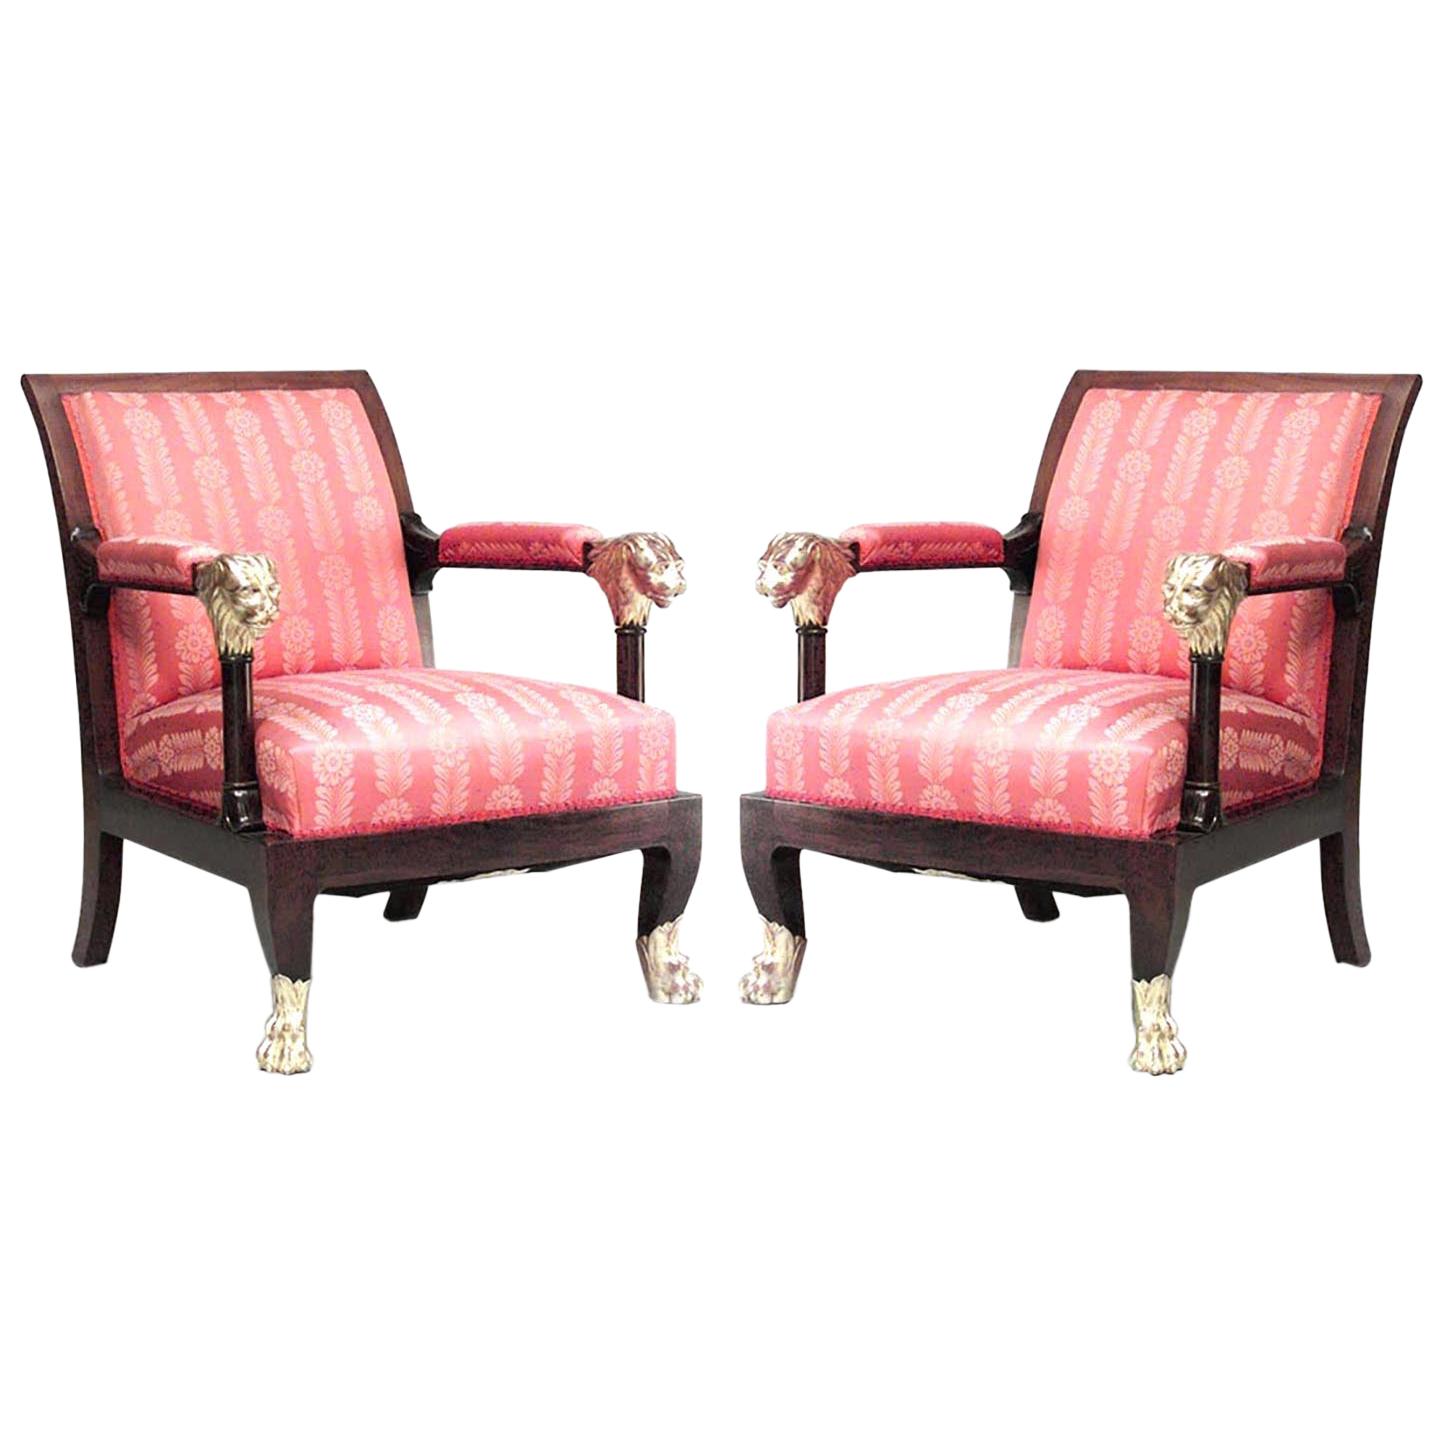 English Regency Red Armchairs